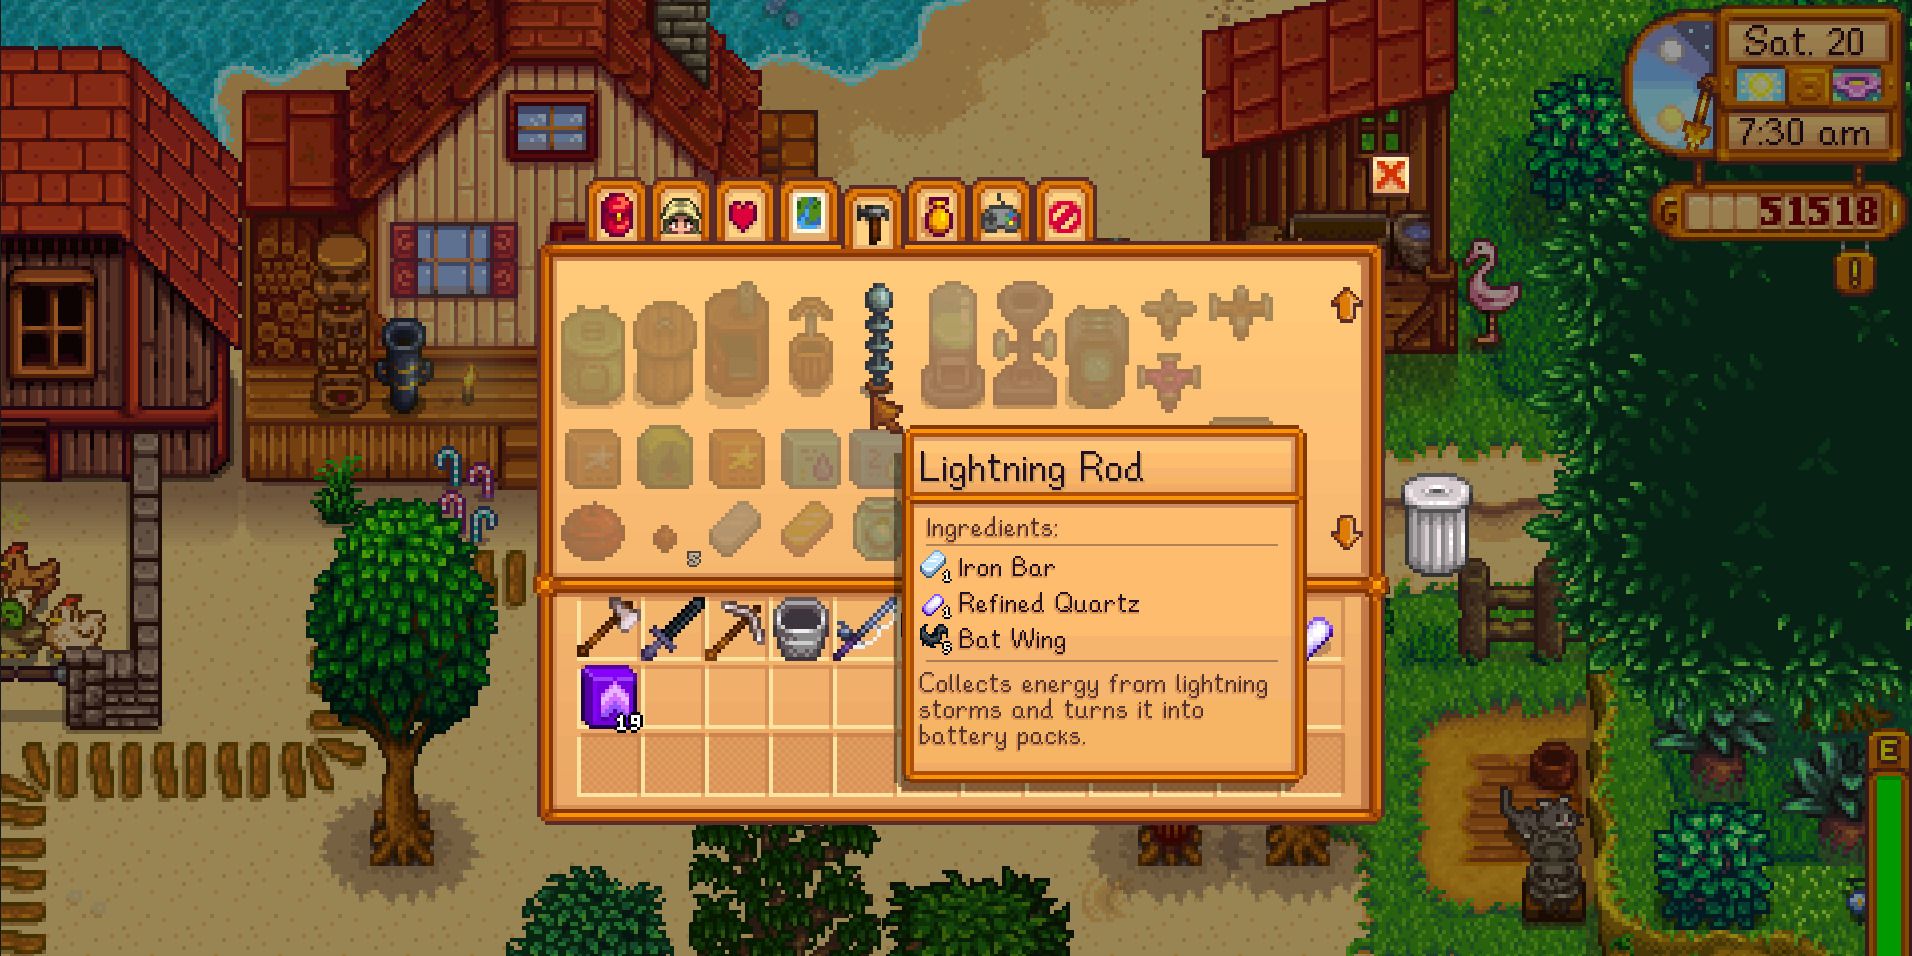 Image of the recipe for a Lightning Rod in Stardew Valley